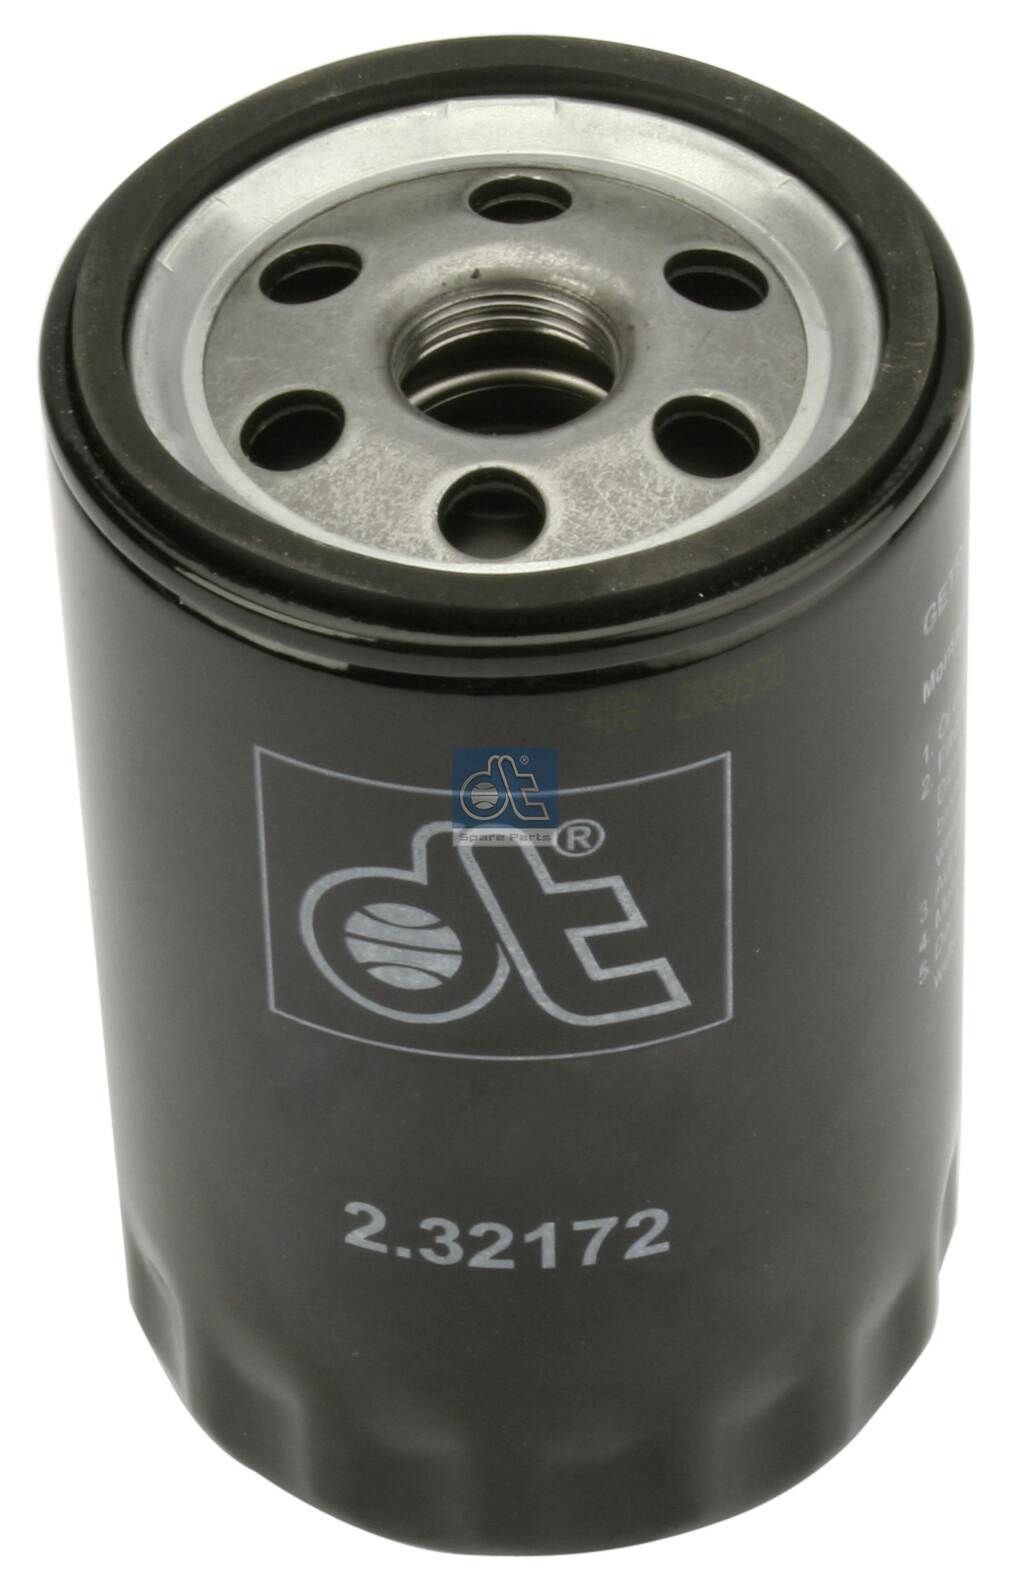 H14W02 DT Spare Parts 2.32172 Oil filter A003 184 06 01